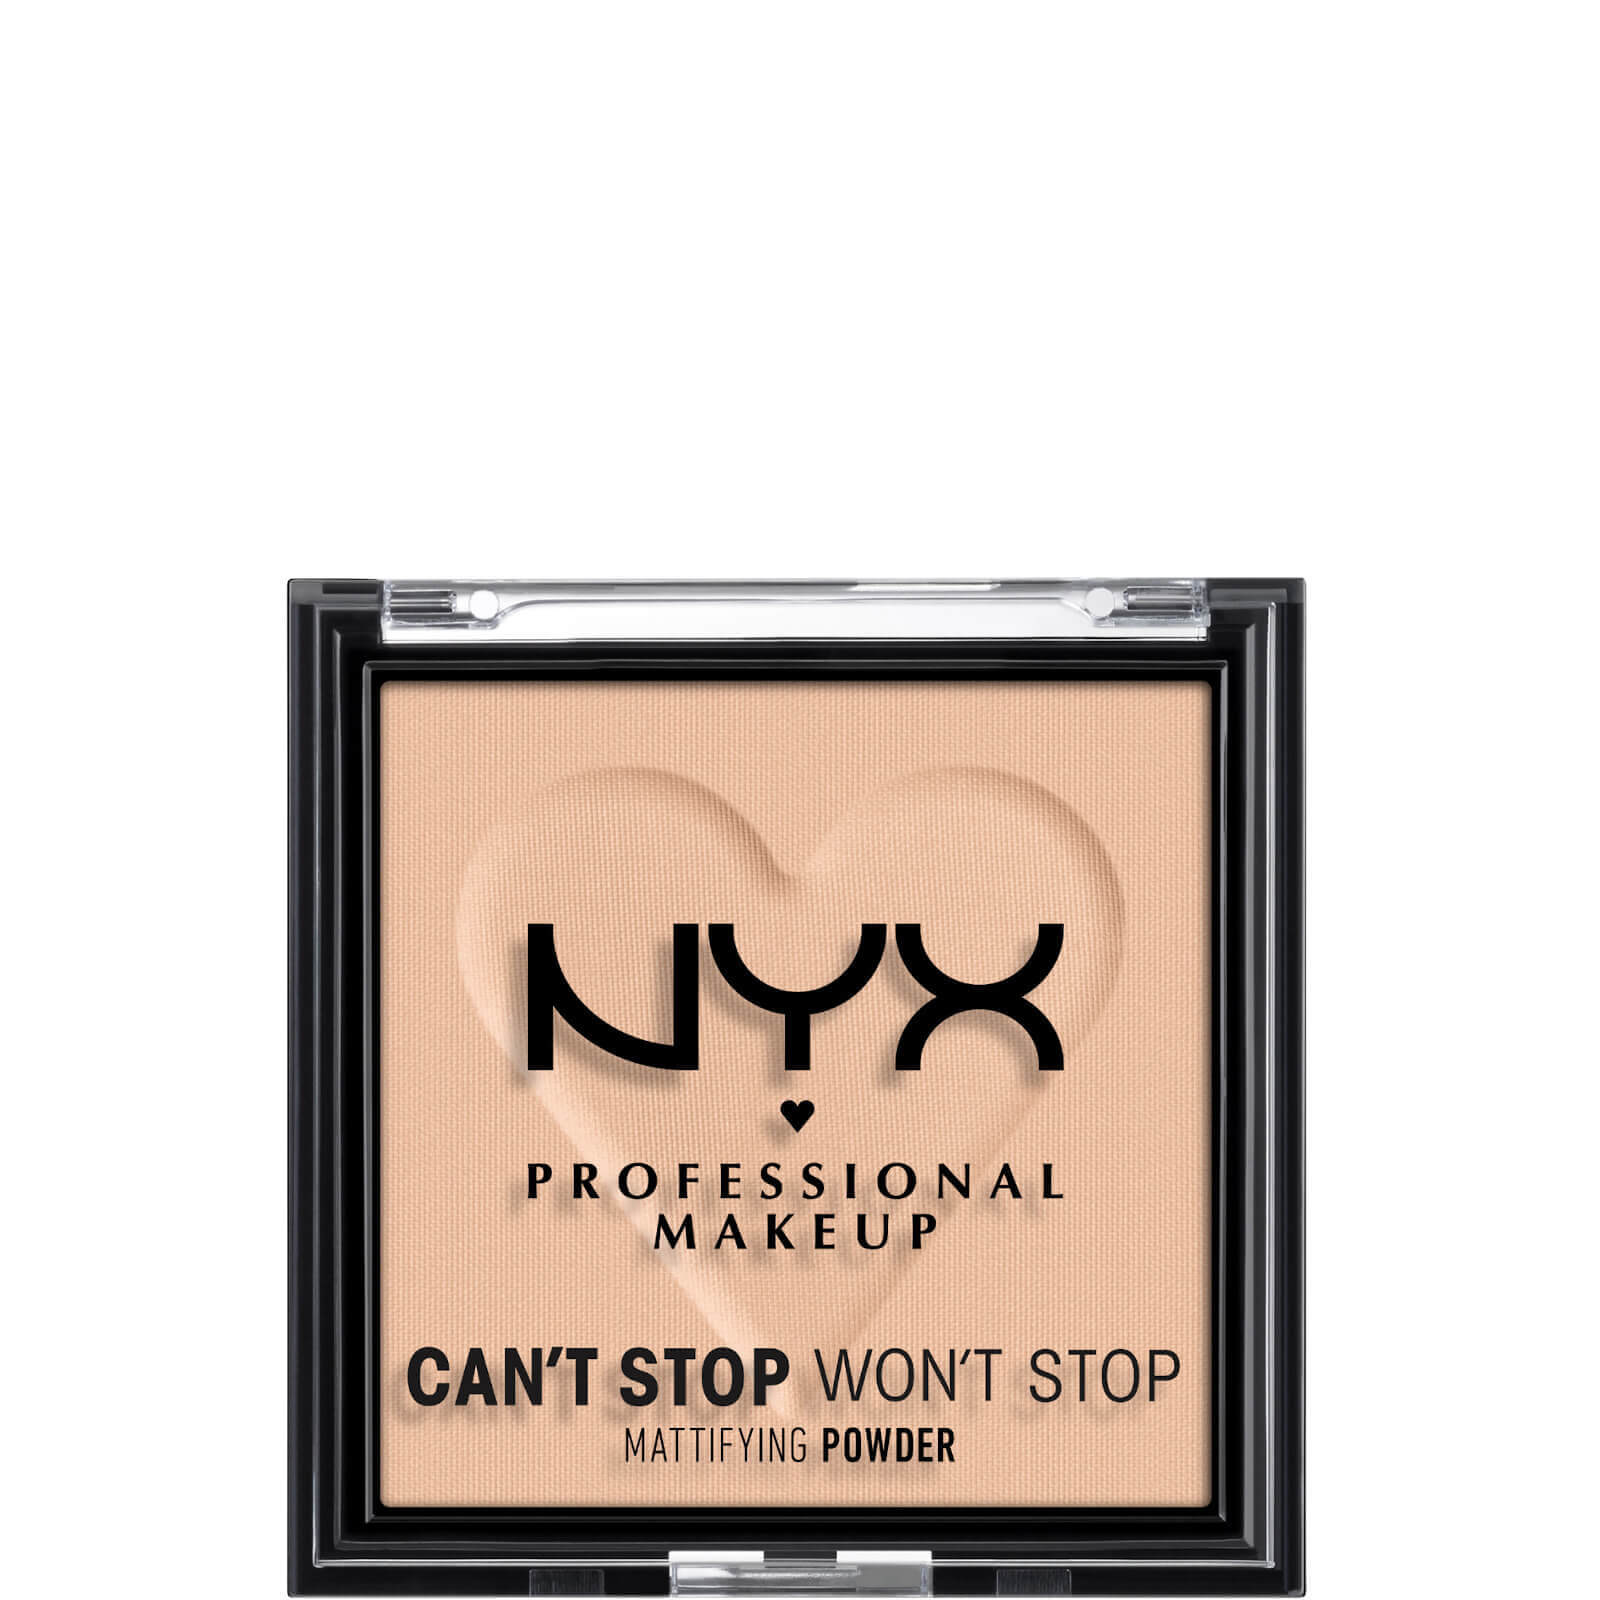 Nyx Professional Makeup Can't Stop Won't Stop Mattifying Lightweight Powder 7g (various Shades) - Light In White